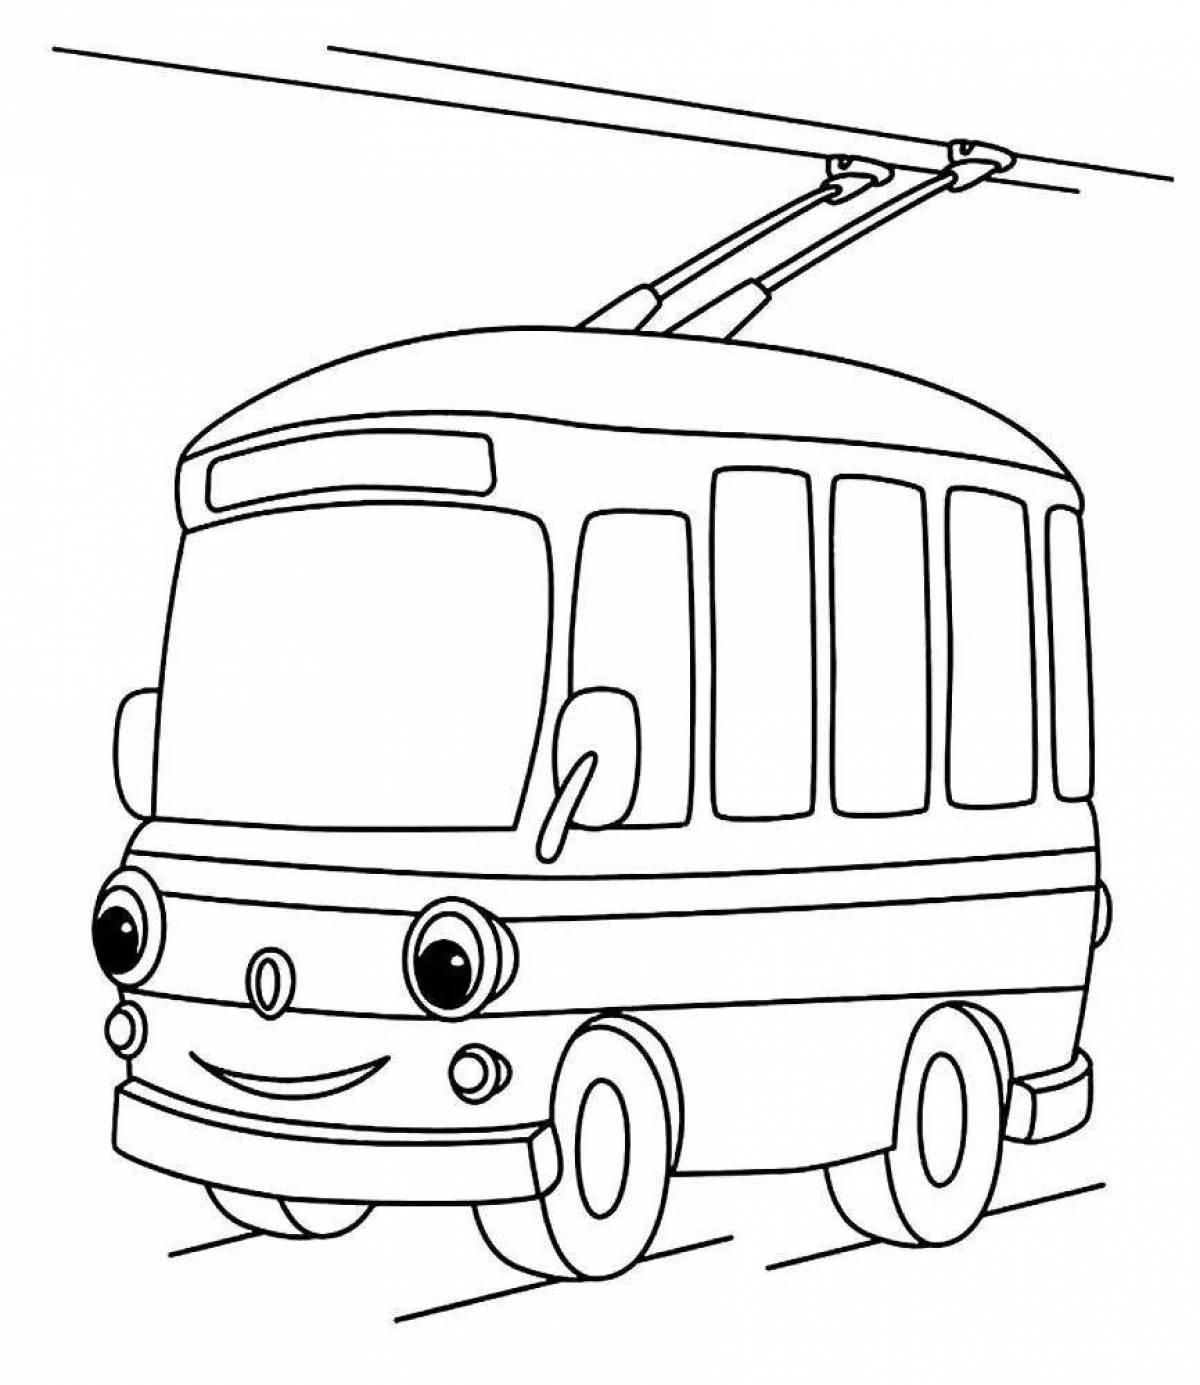 Adorable trolleybus coloring book for kids and teens